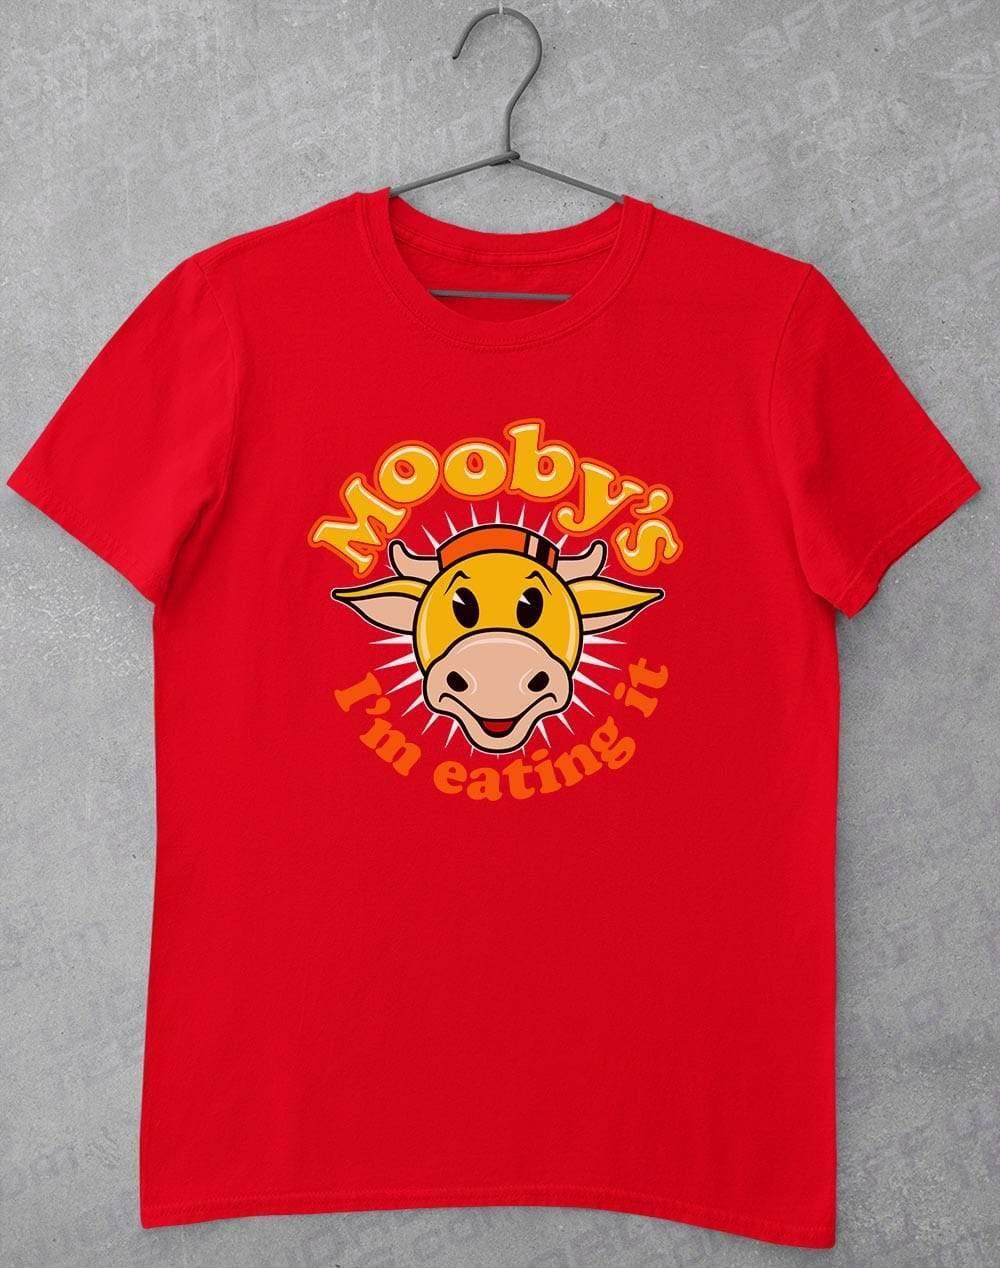 Mooby's T-Shirt S / Red  - Off World Tees